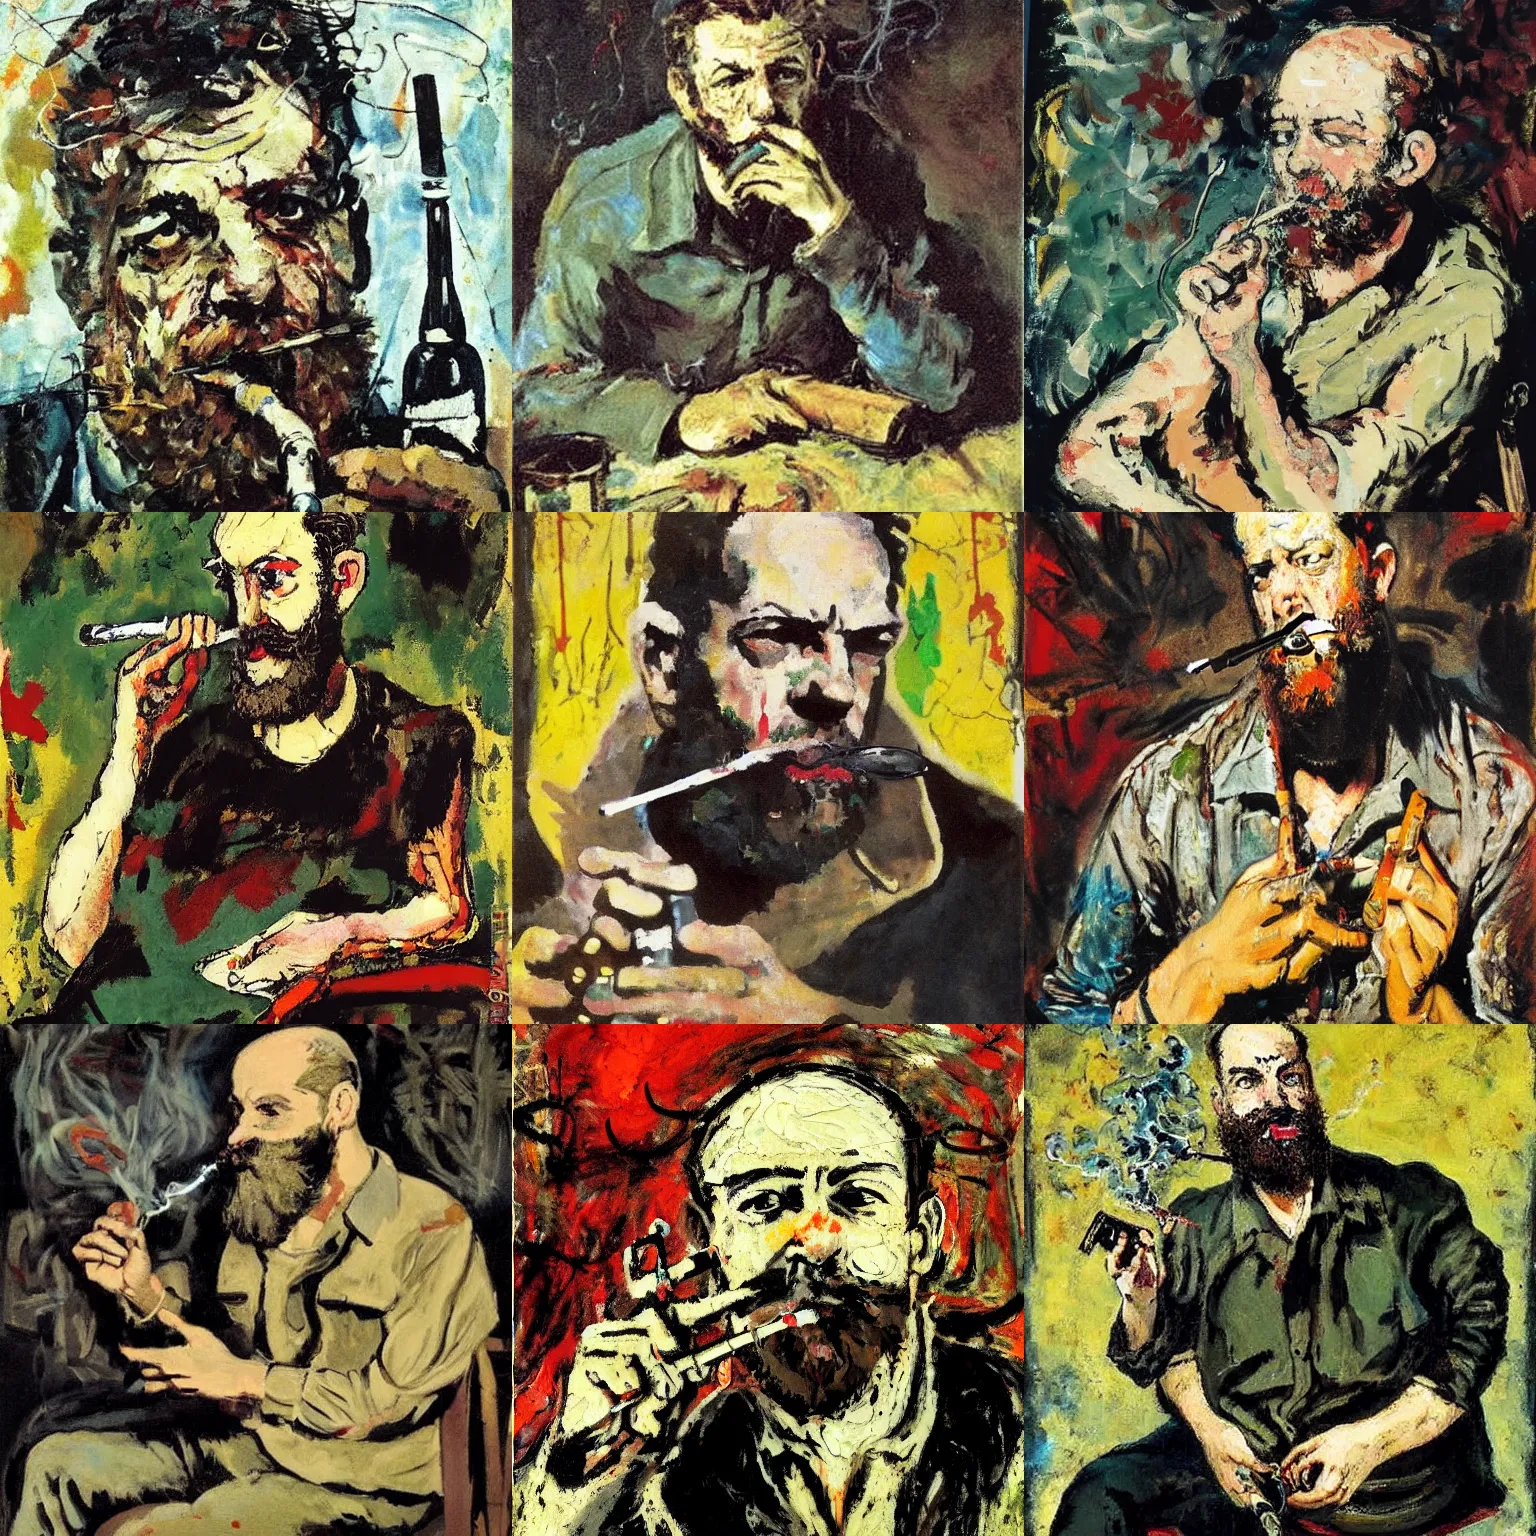 Prompt: Jackson Pollock painting of a writer with a beard sitting, he is smoking a cigarette, he is holding a bottle in his other hand, highly detailed, realistic